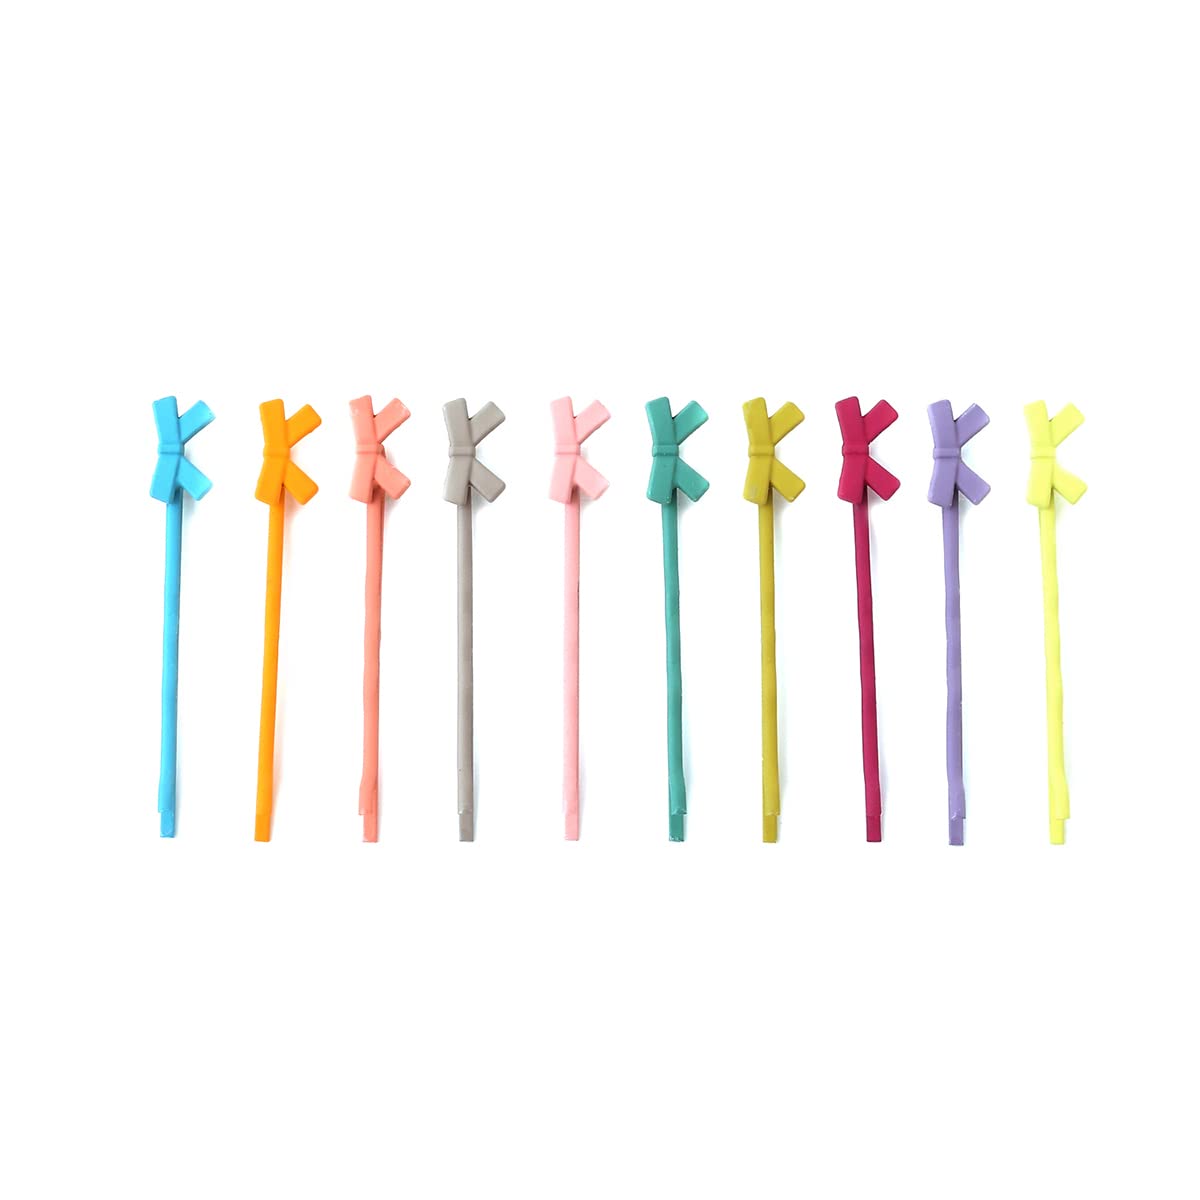 Melbees by Yellow Chimes Hair Pins for Girls Kids Hair Accessories for Girls Hair Pin 10 Pcs Bow Bobby Pins for Hair Multicolor Charm Hairpin Bobby Hair Pins for Girls Kids Teens Toddlers